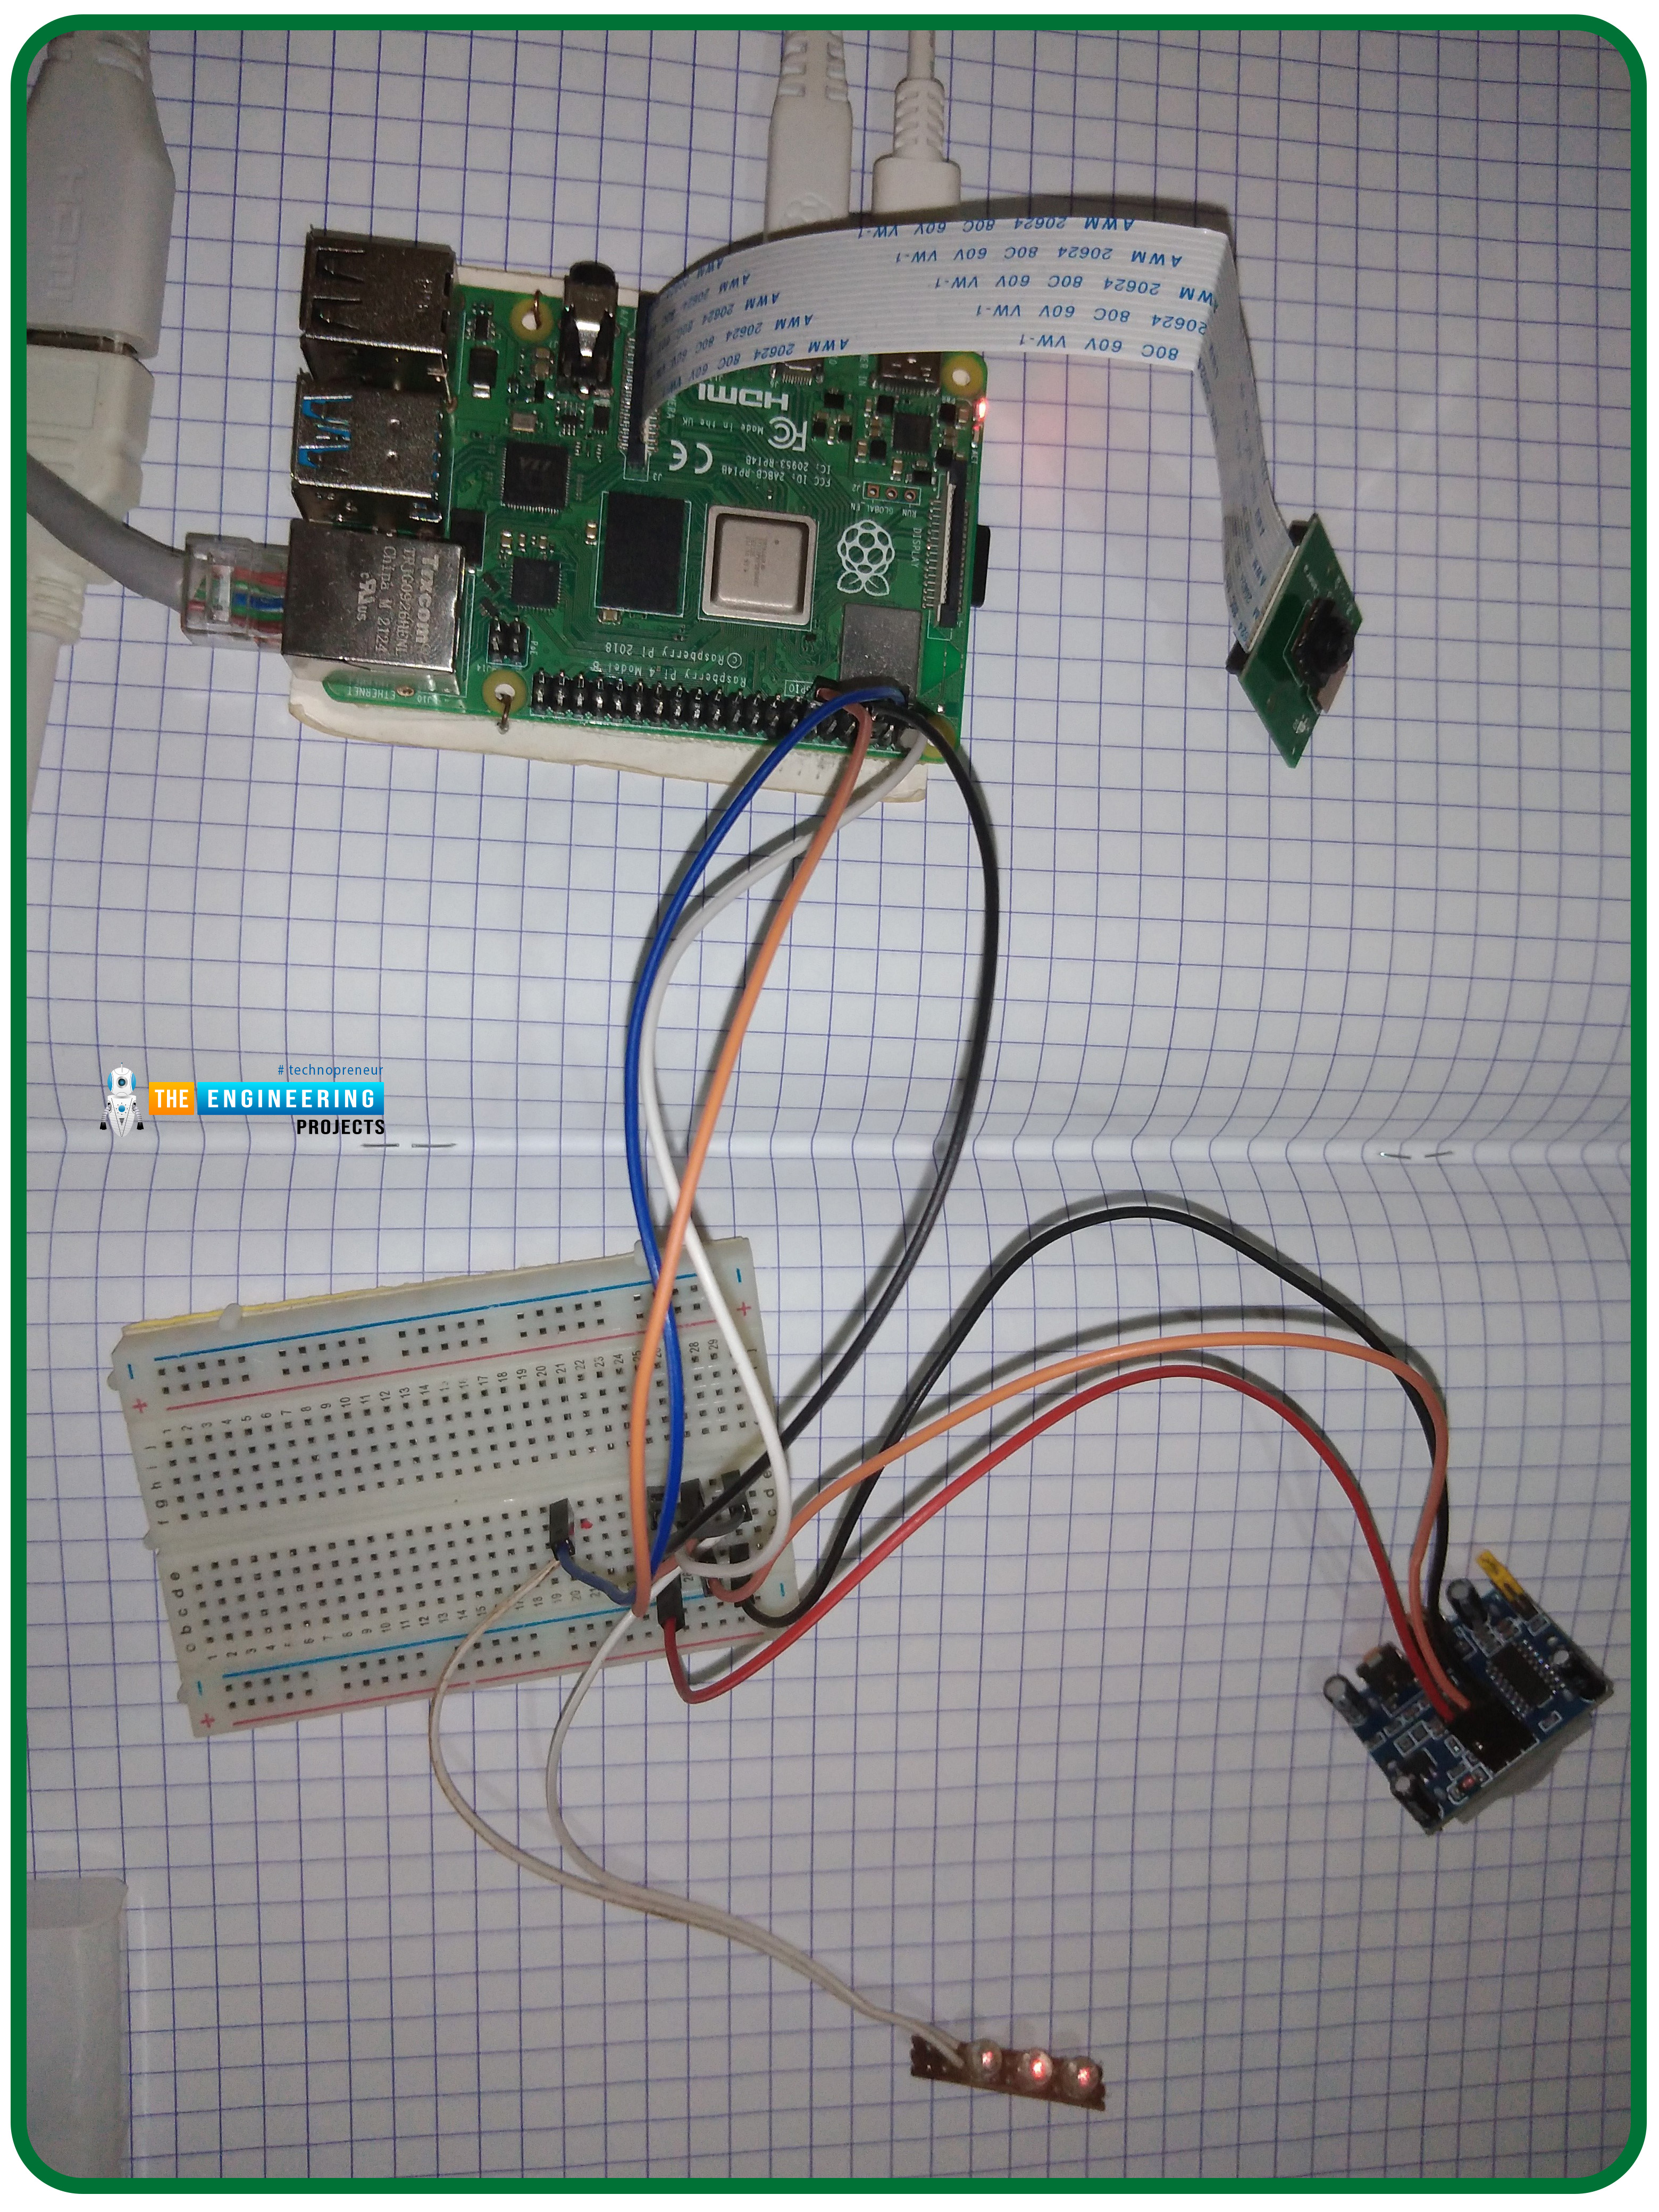 Security system using motion sensor with an alarm, security system with twilio in RPi4, RPi4 security system, Raspberry Pi 4 security system